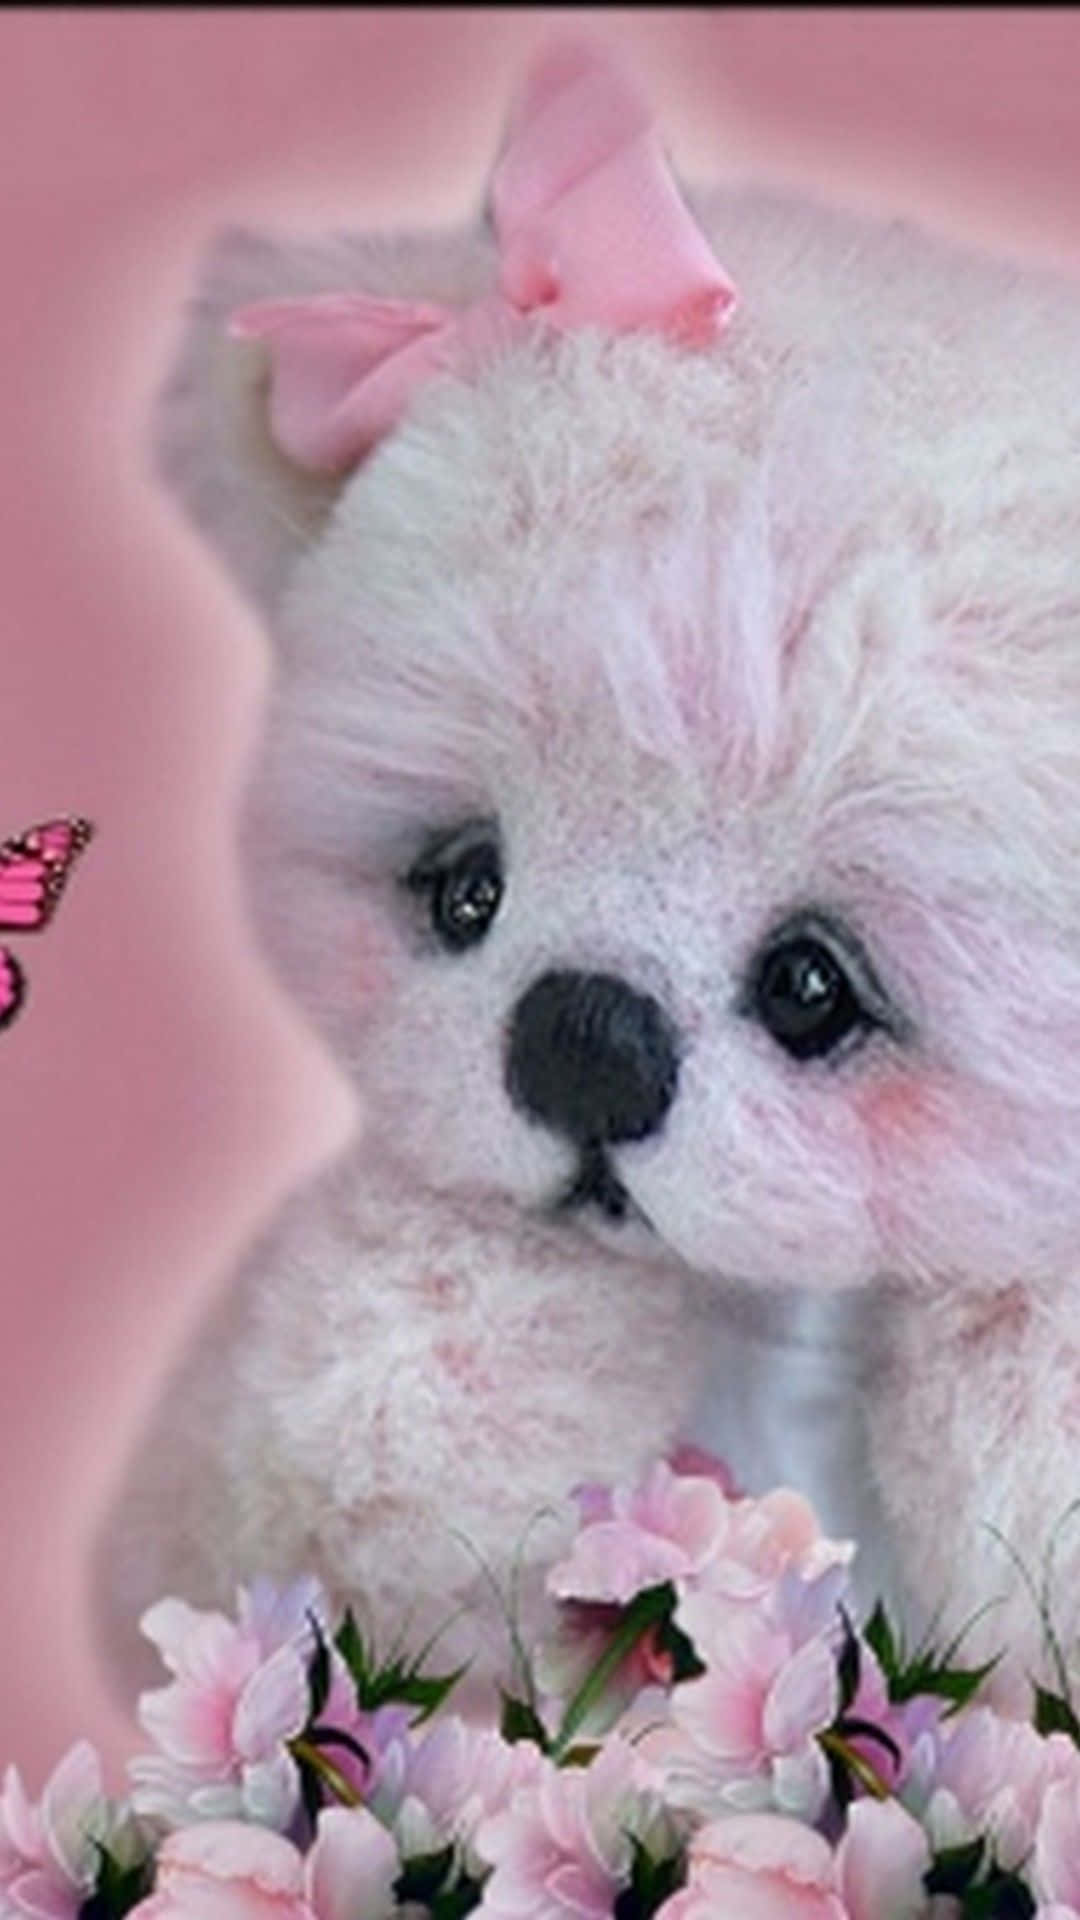 A White Teddy Bear With Pink Flowers And Butterflies